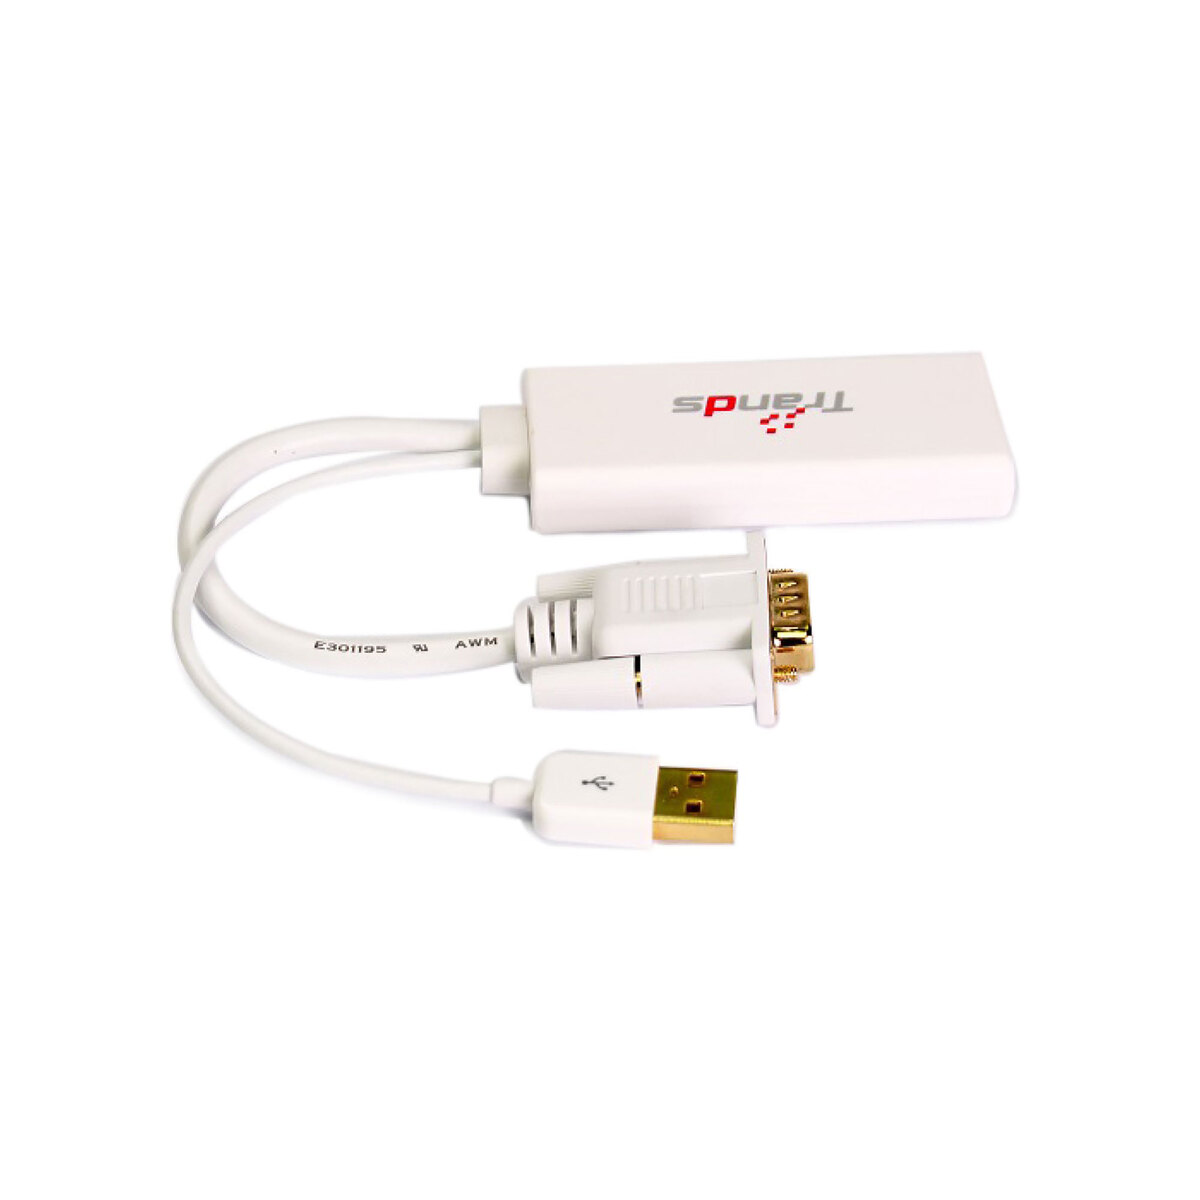 Trands VGA-HDMI Adapter with Audio 5989